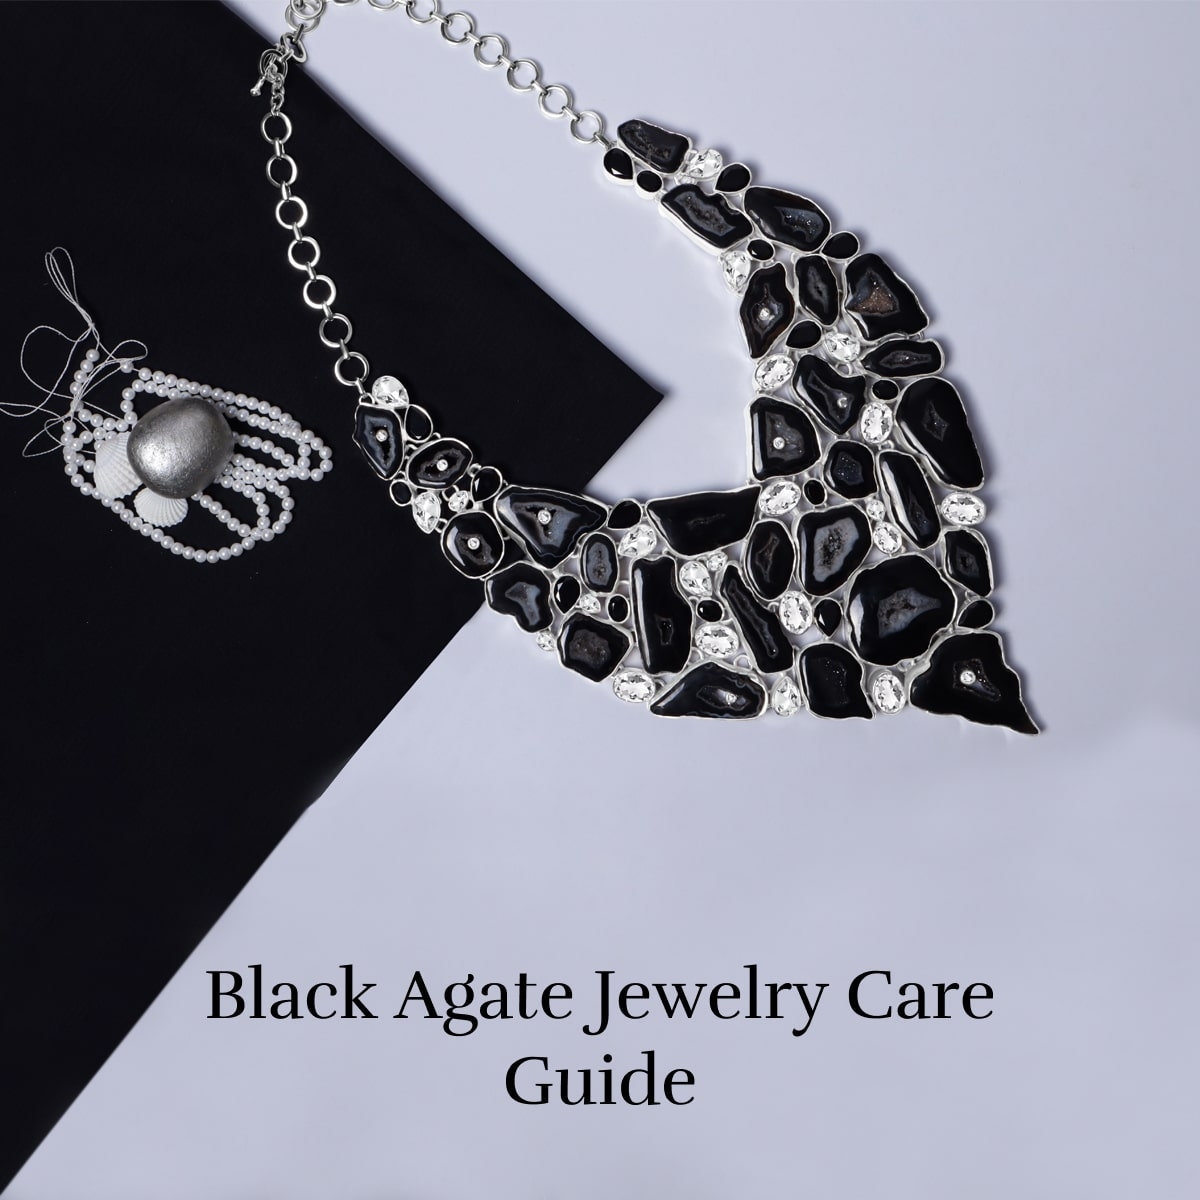 Maintenance Tips for Your Black Agate Jewelry